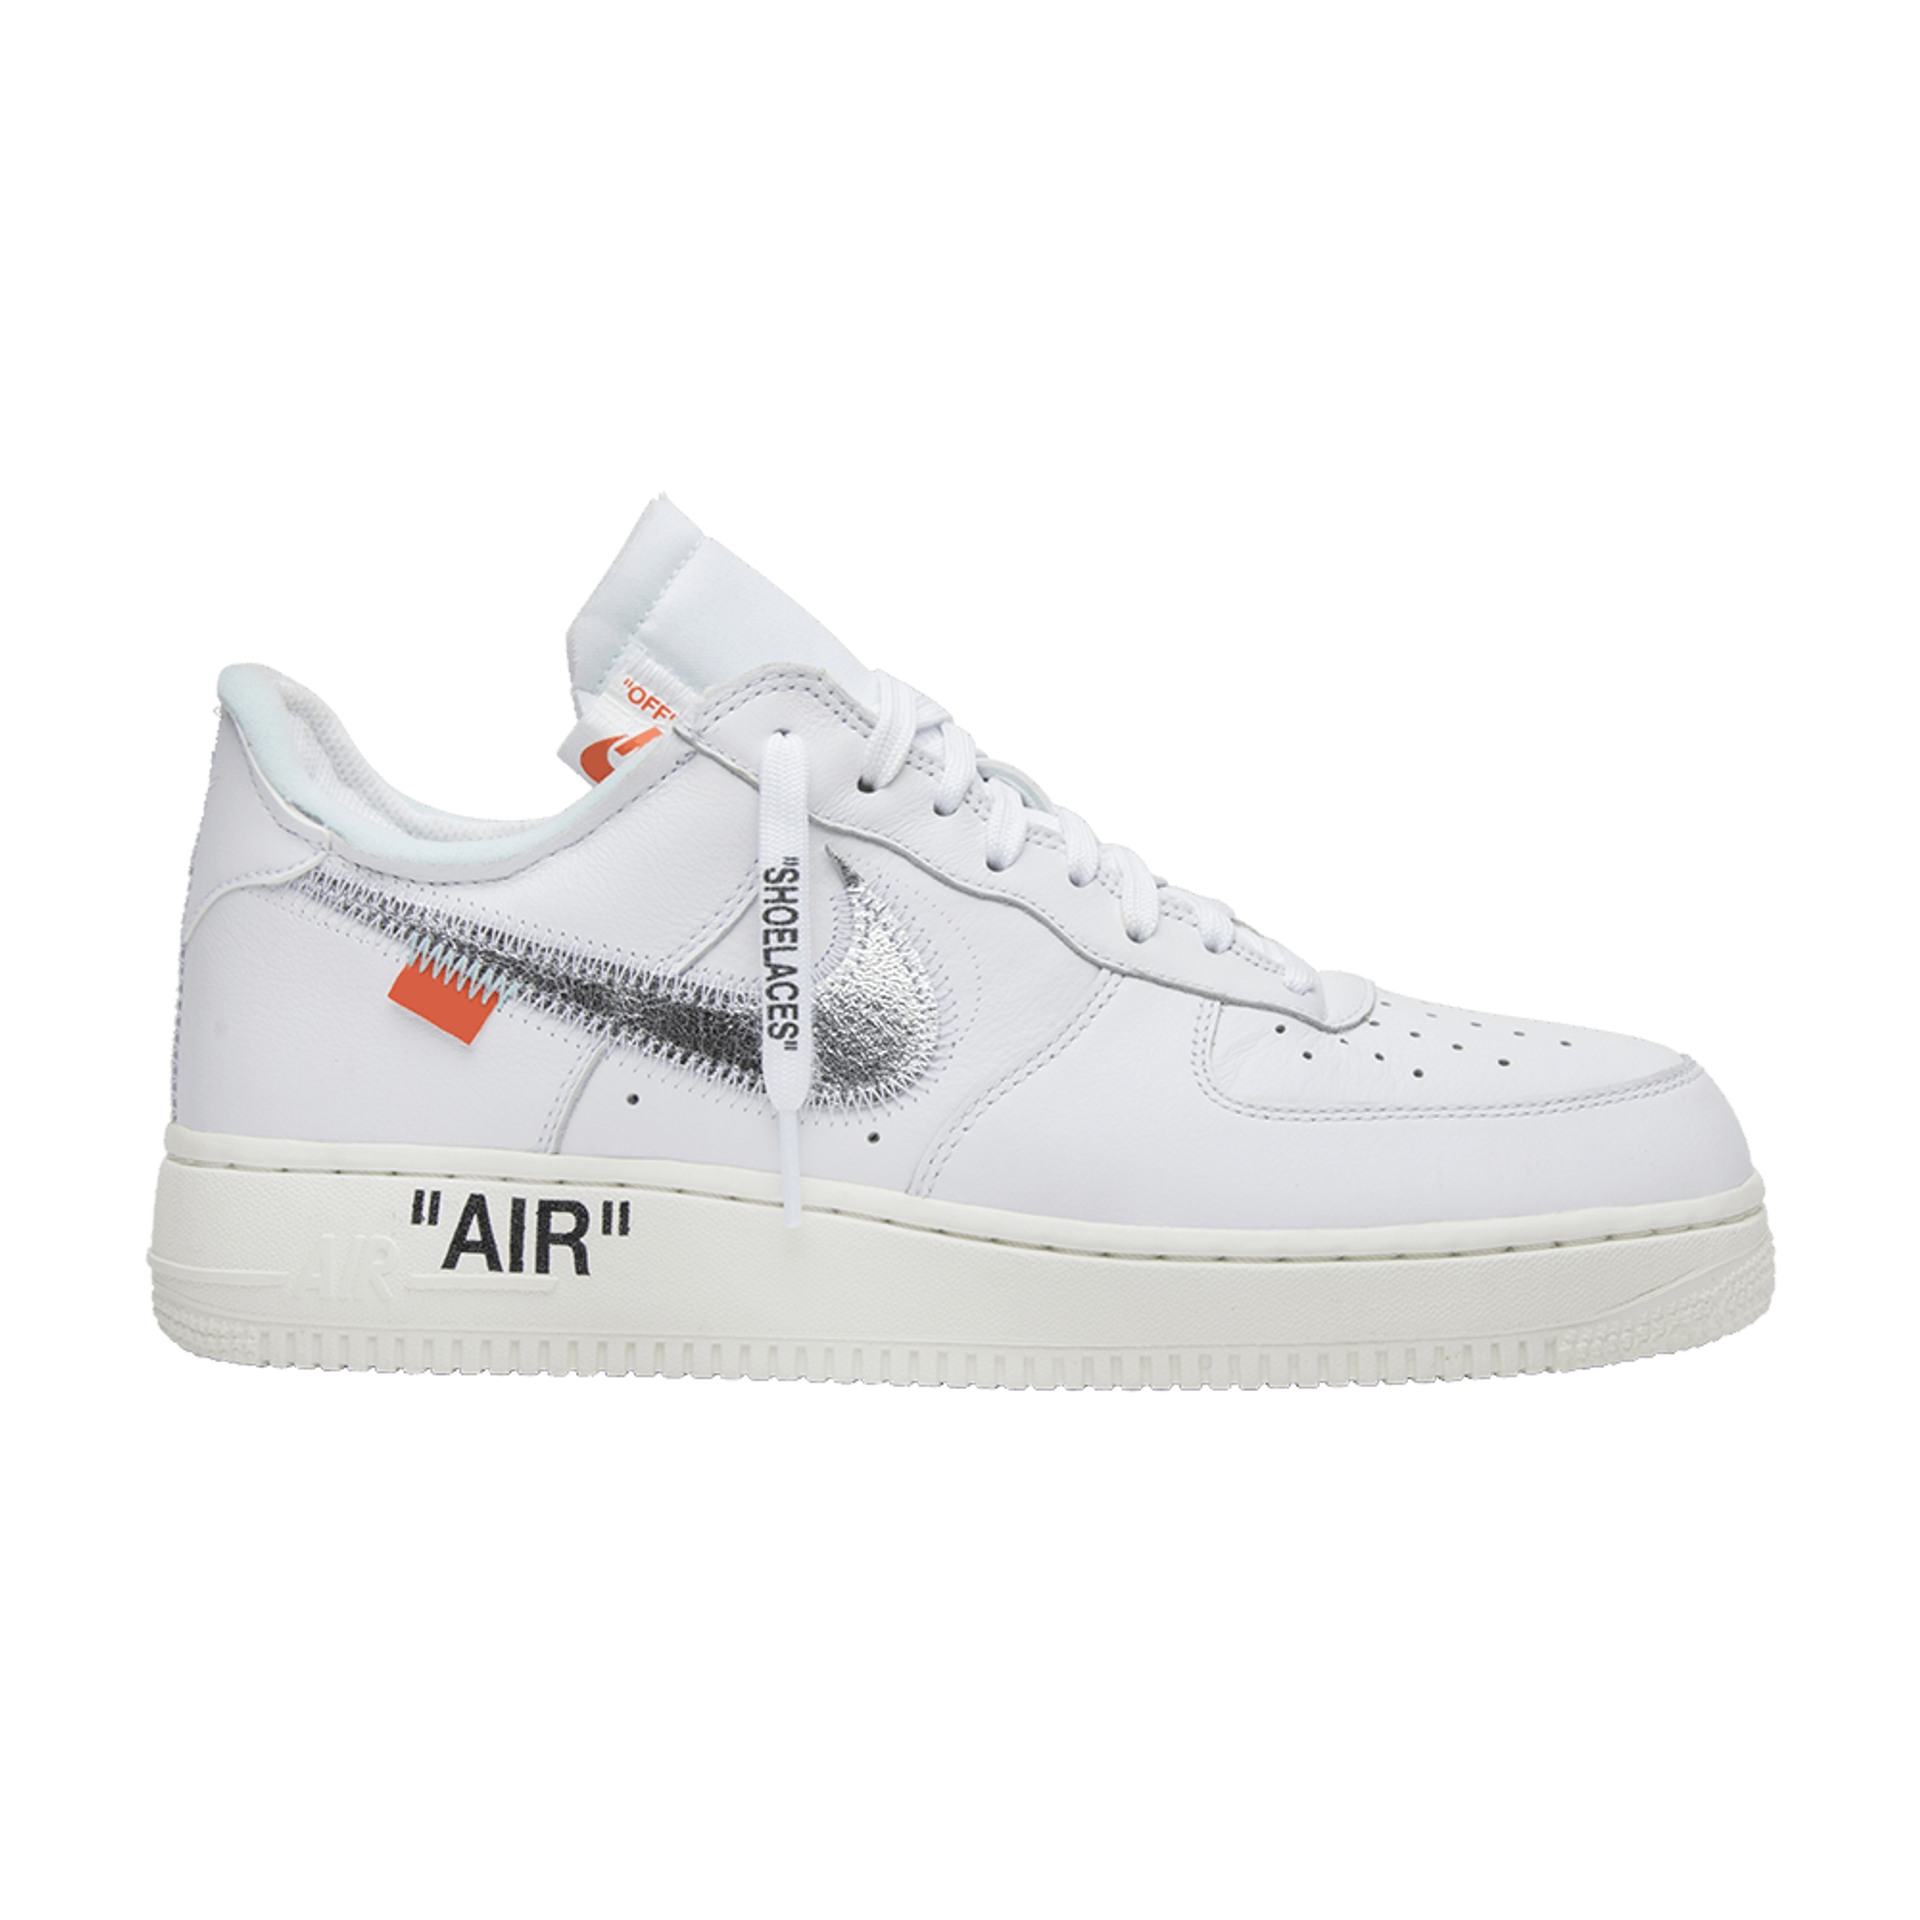 Nike OFF-WHITE x Air Force 1 'ComplexCon Exclusive' - AO4297 100 | Ox ...